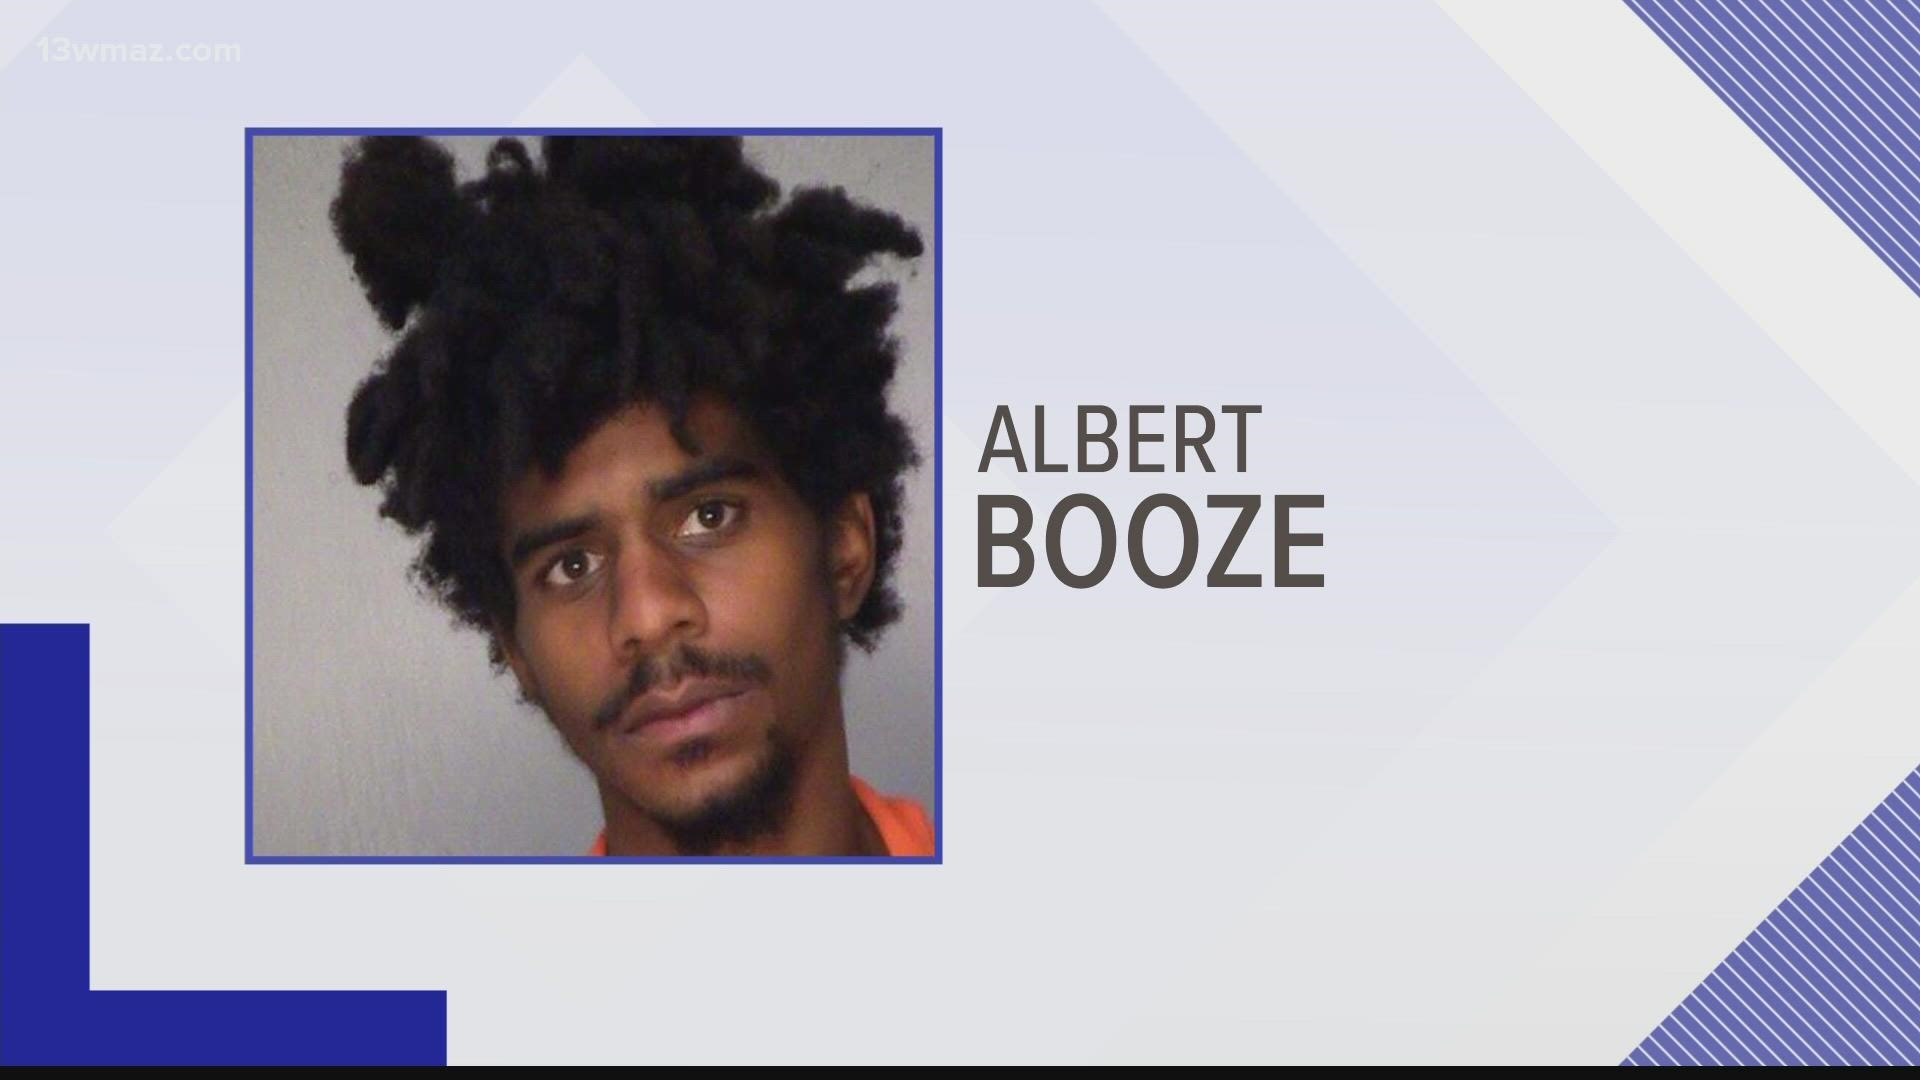 Albert Booze is accused of murdering a Bibb County officer and assaulting Monroe County officers in jail